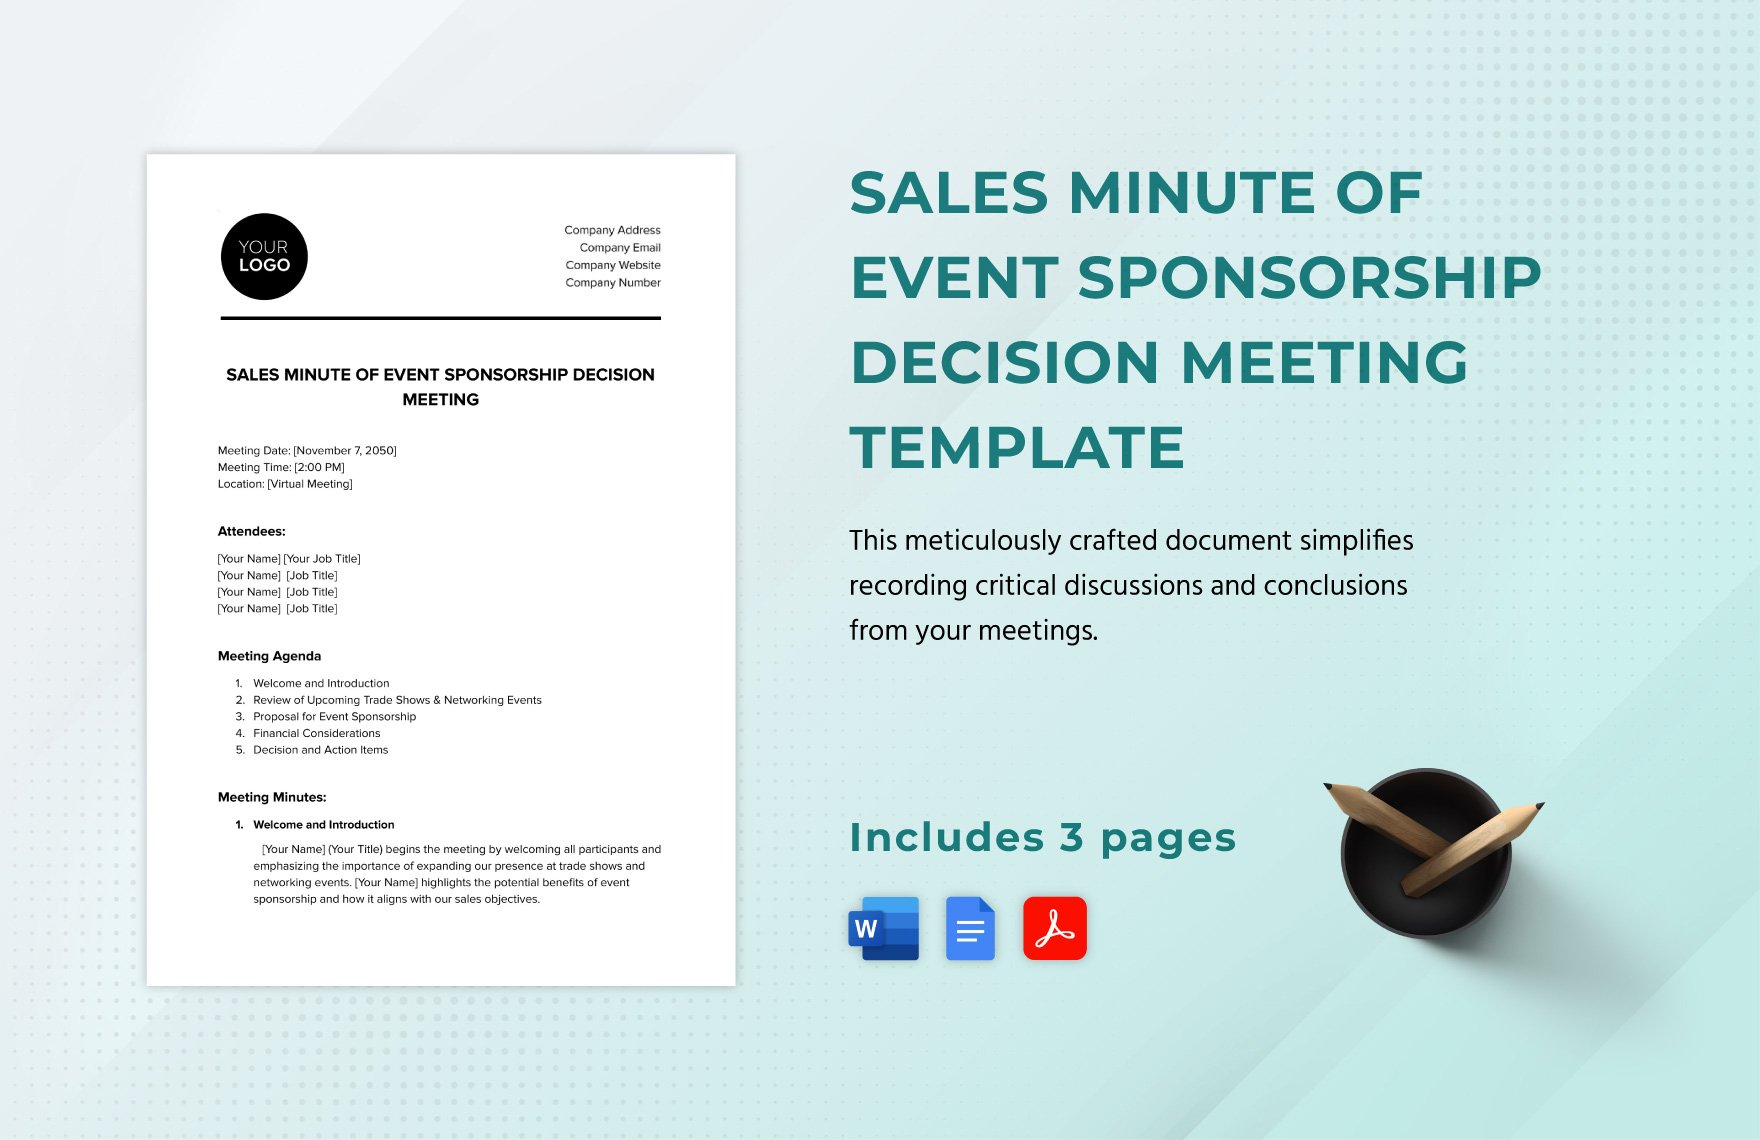 Sales Minute of Event Sponsorship Decision Meeting Template